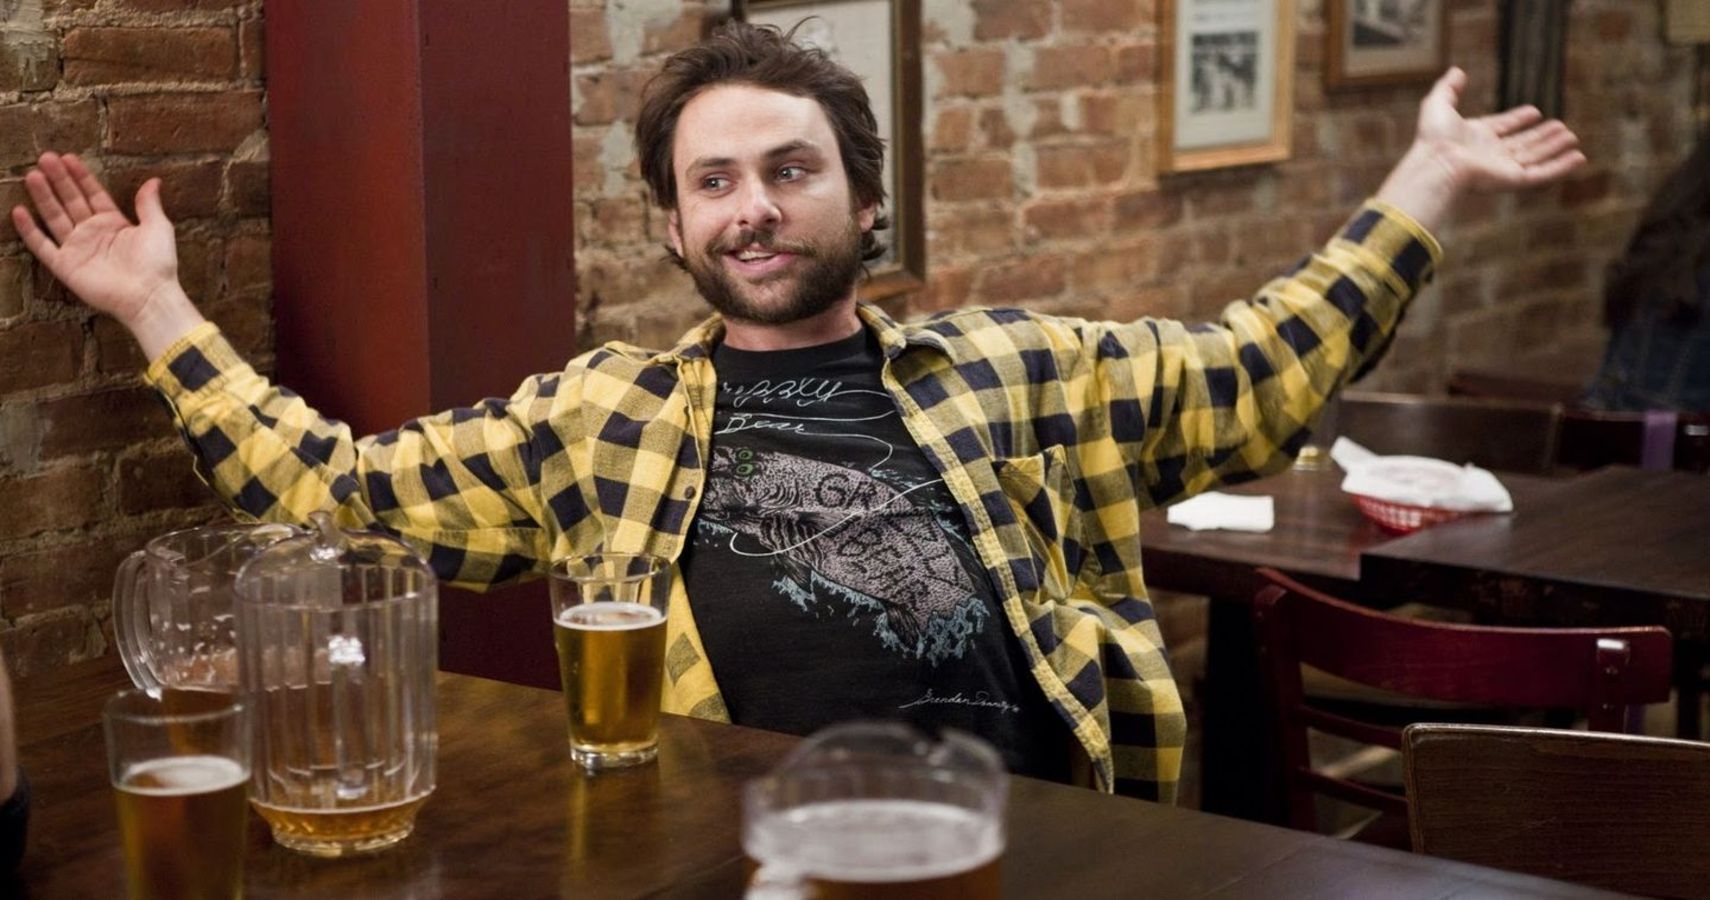 Ordering beer [It's Always Sunny in Philadelphia] : r/TelevisionQuotes